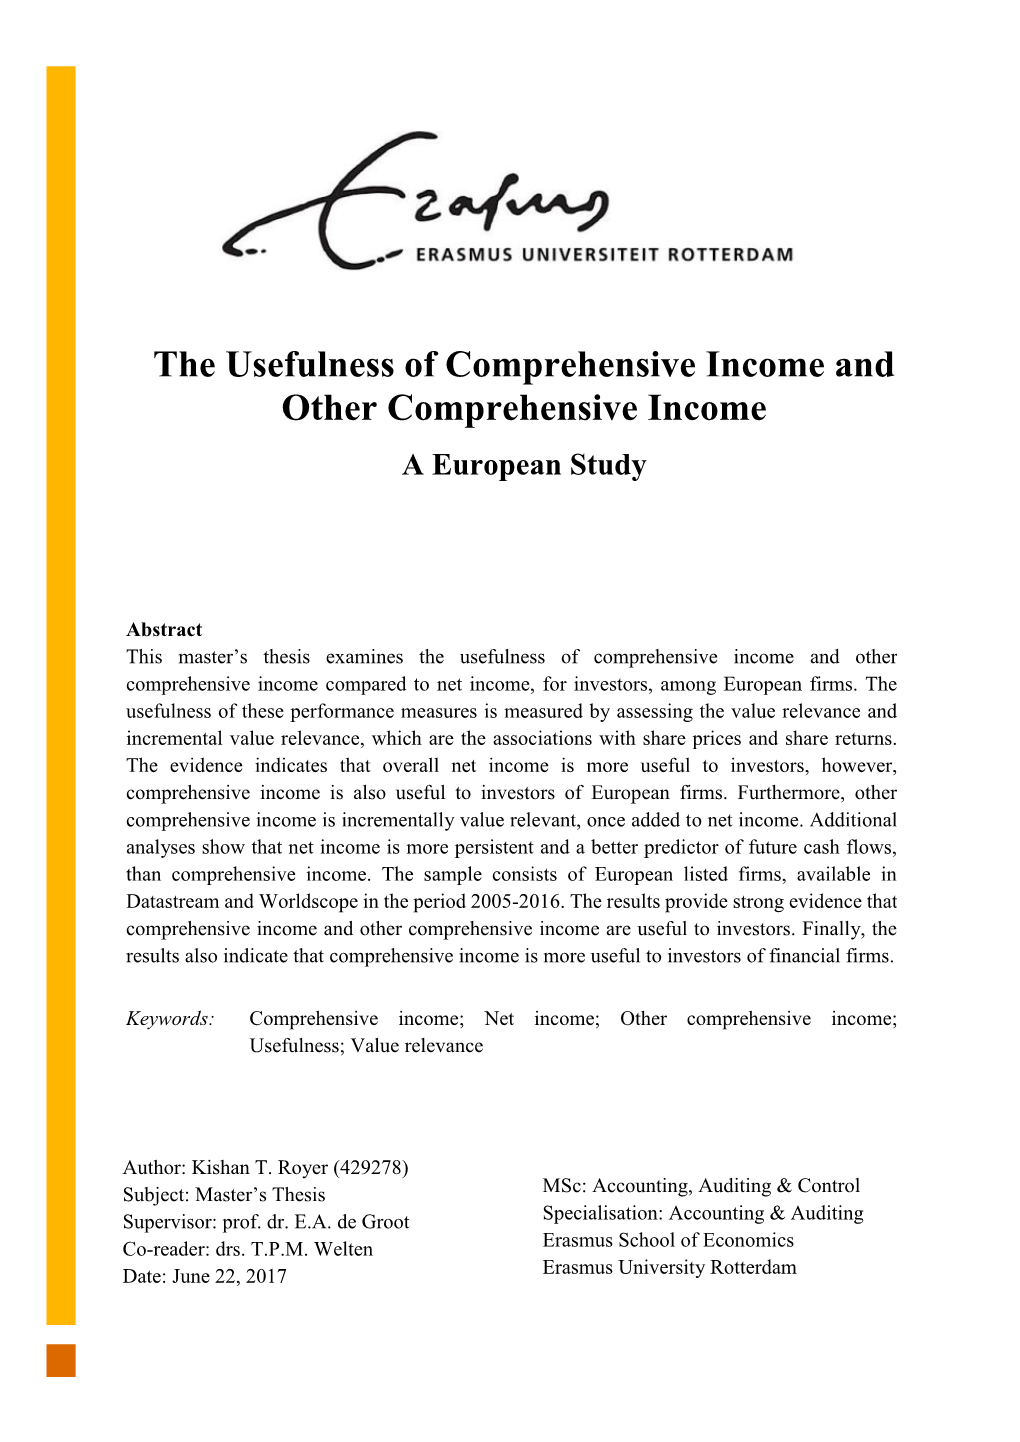 The Usefulness of Comprehensive Income and Other Comprehensive Income